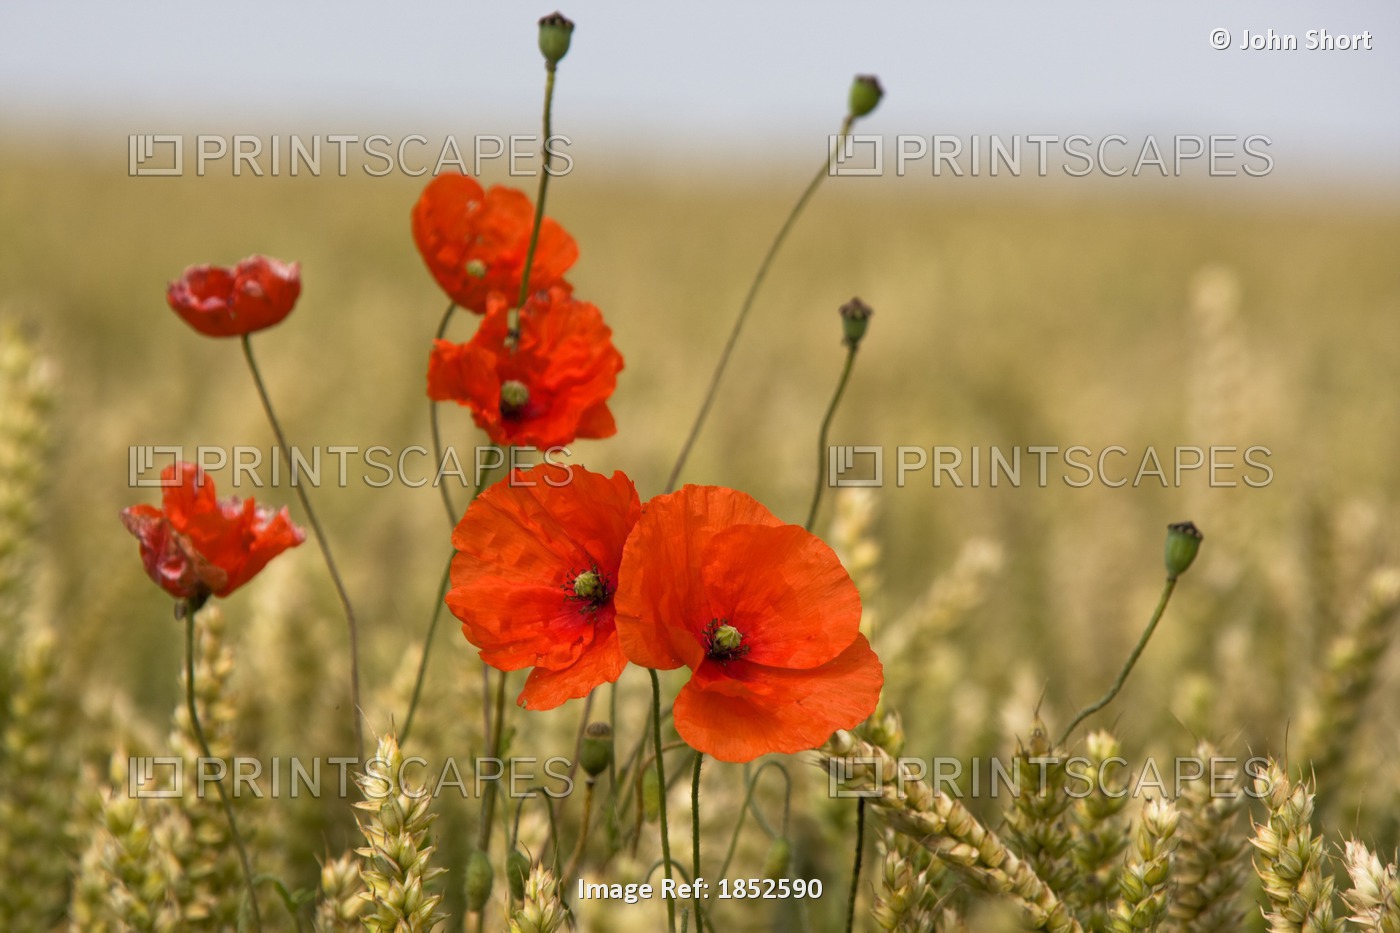 Red Poppies In A Field Of Grain